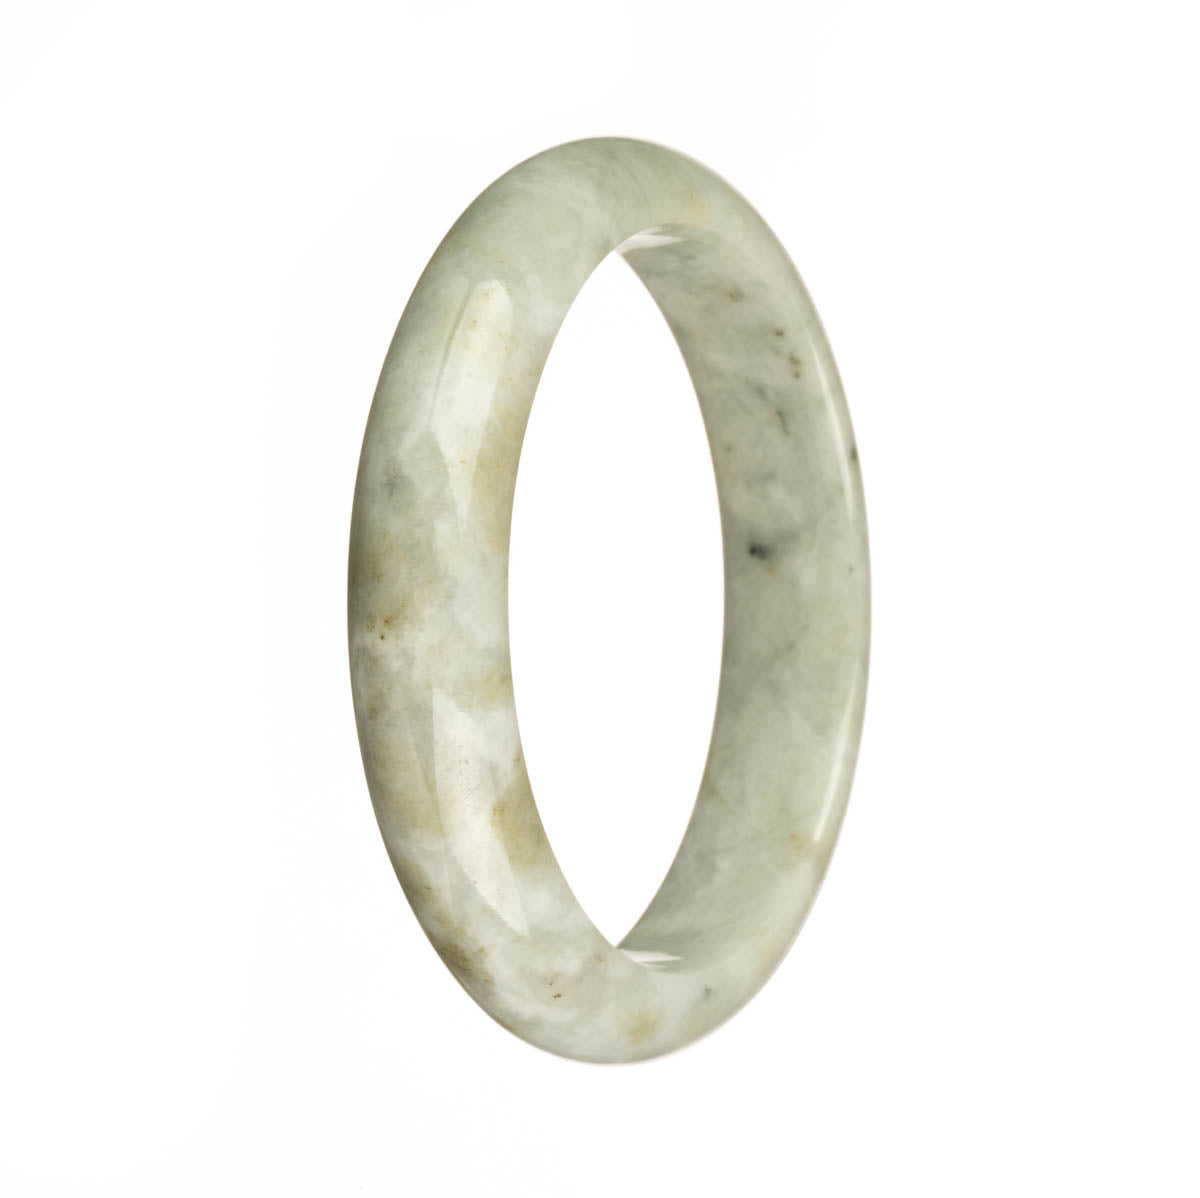 An authentic Grade A grey jadeite jade bangle with a dark grey pattern, shaped like a half moon, measuring 59mm. Sold by MAYS GEMS.